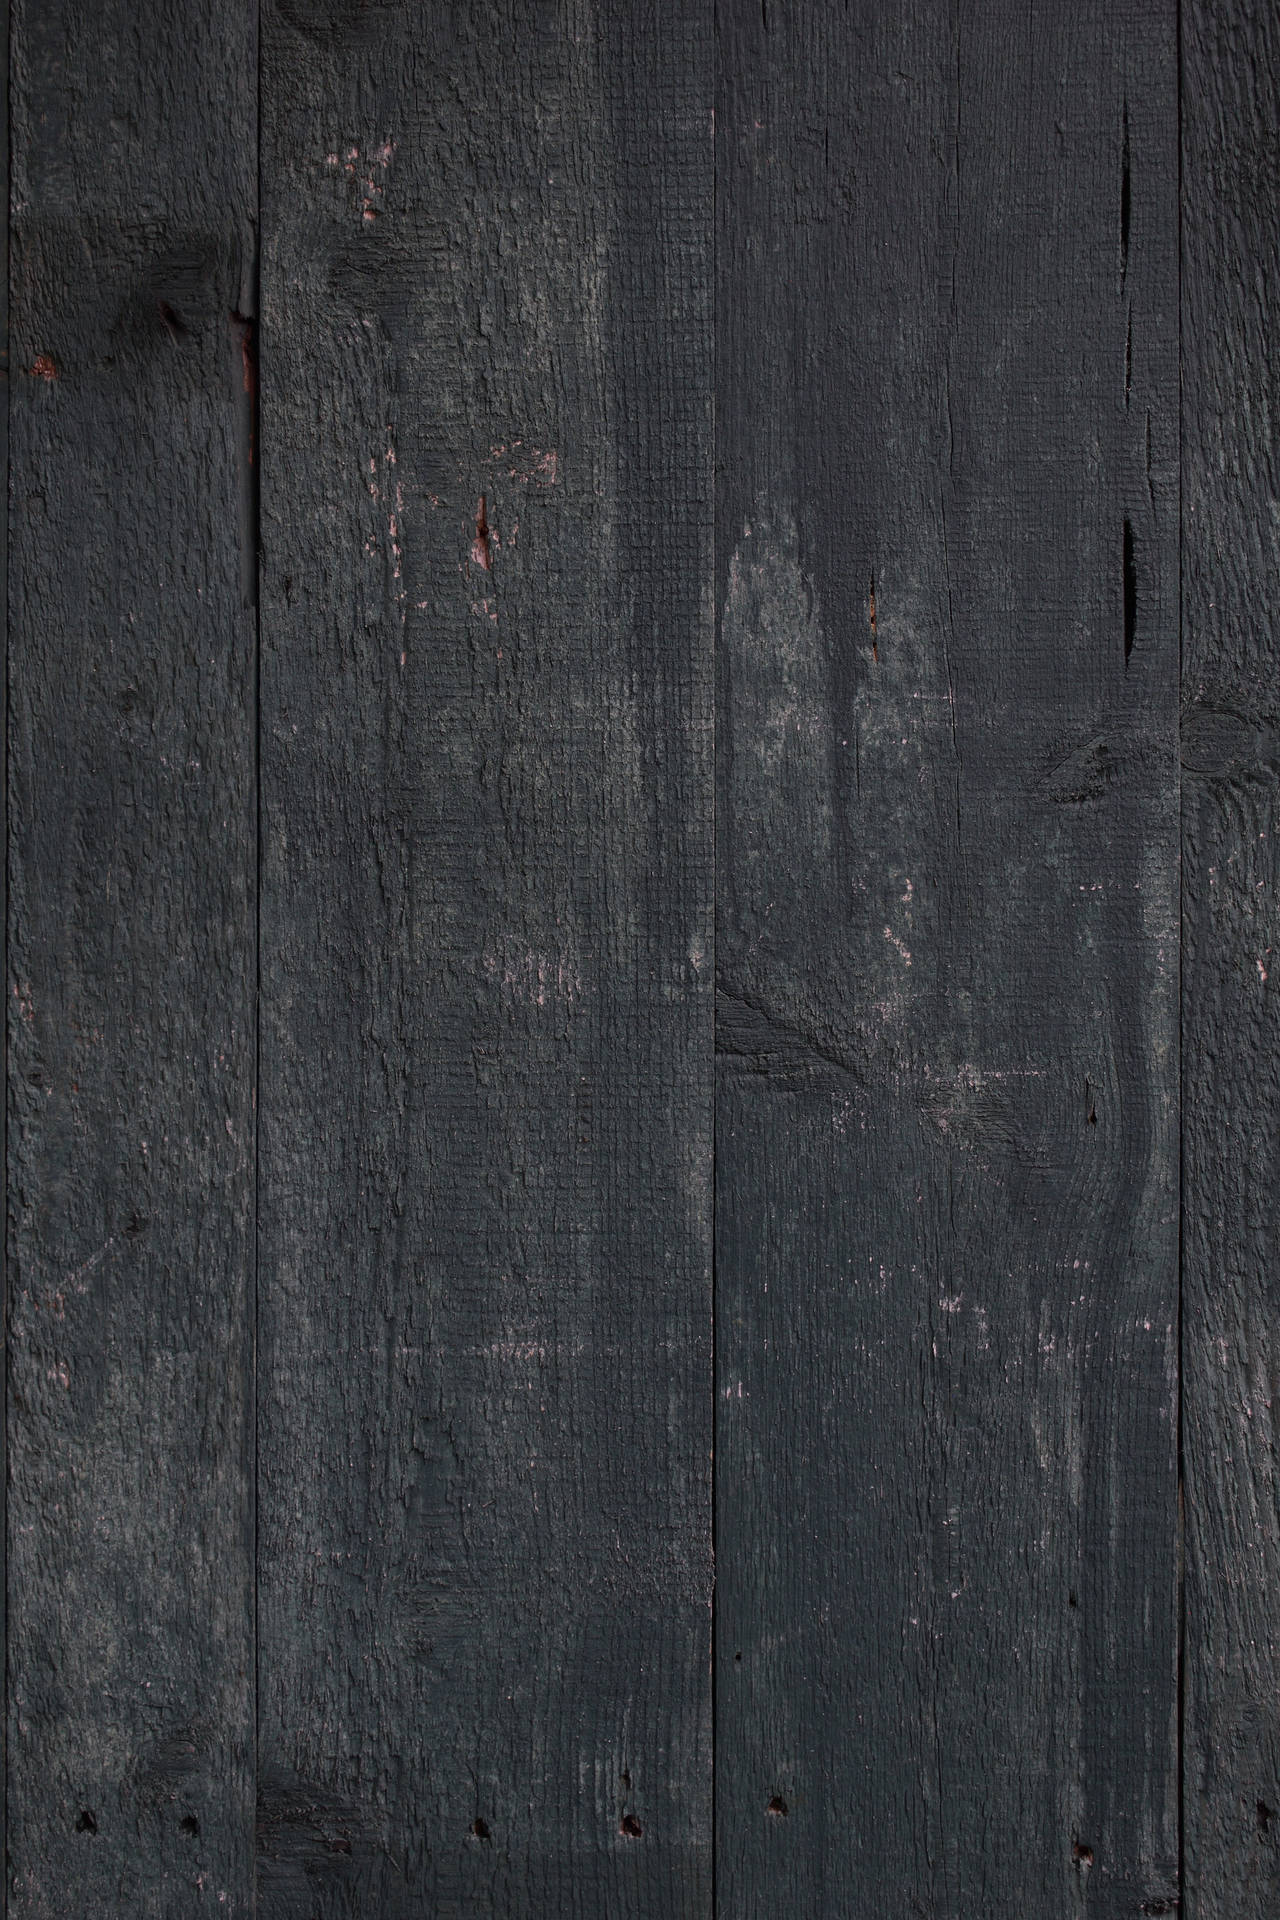 "Detailed Black Wood Texture in High Resolution" Wallpaper